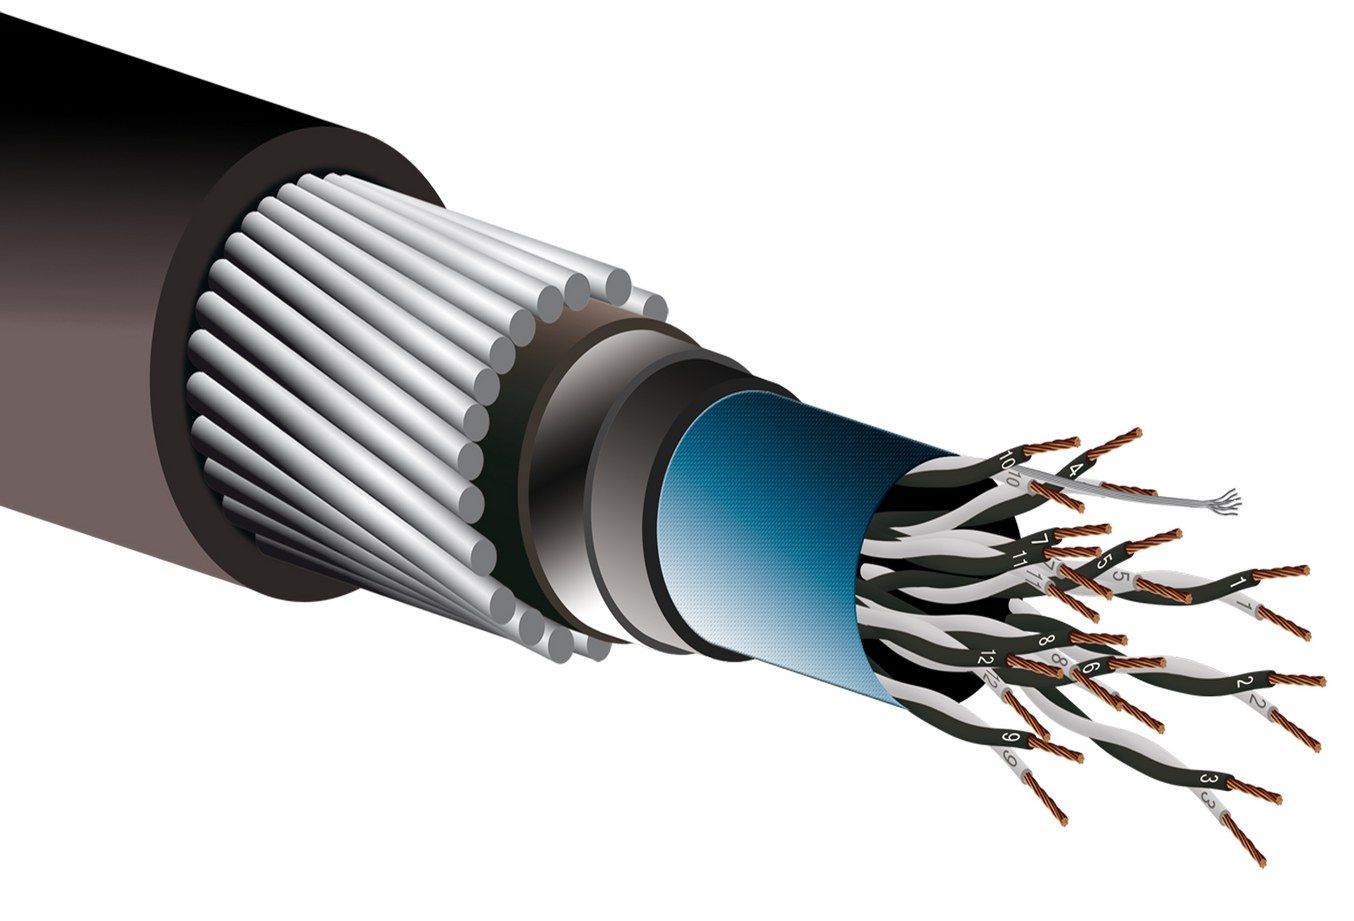 Instrumentation Cables Exporters, Suppliers, Manufacturers India | Instrumentation Cables Delhi India